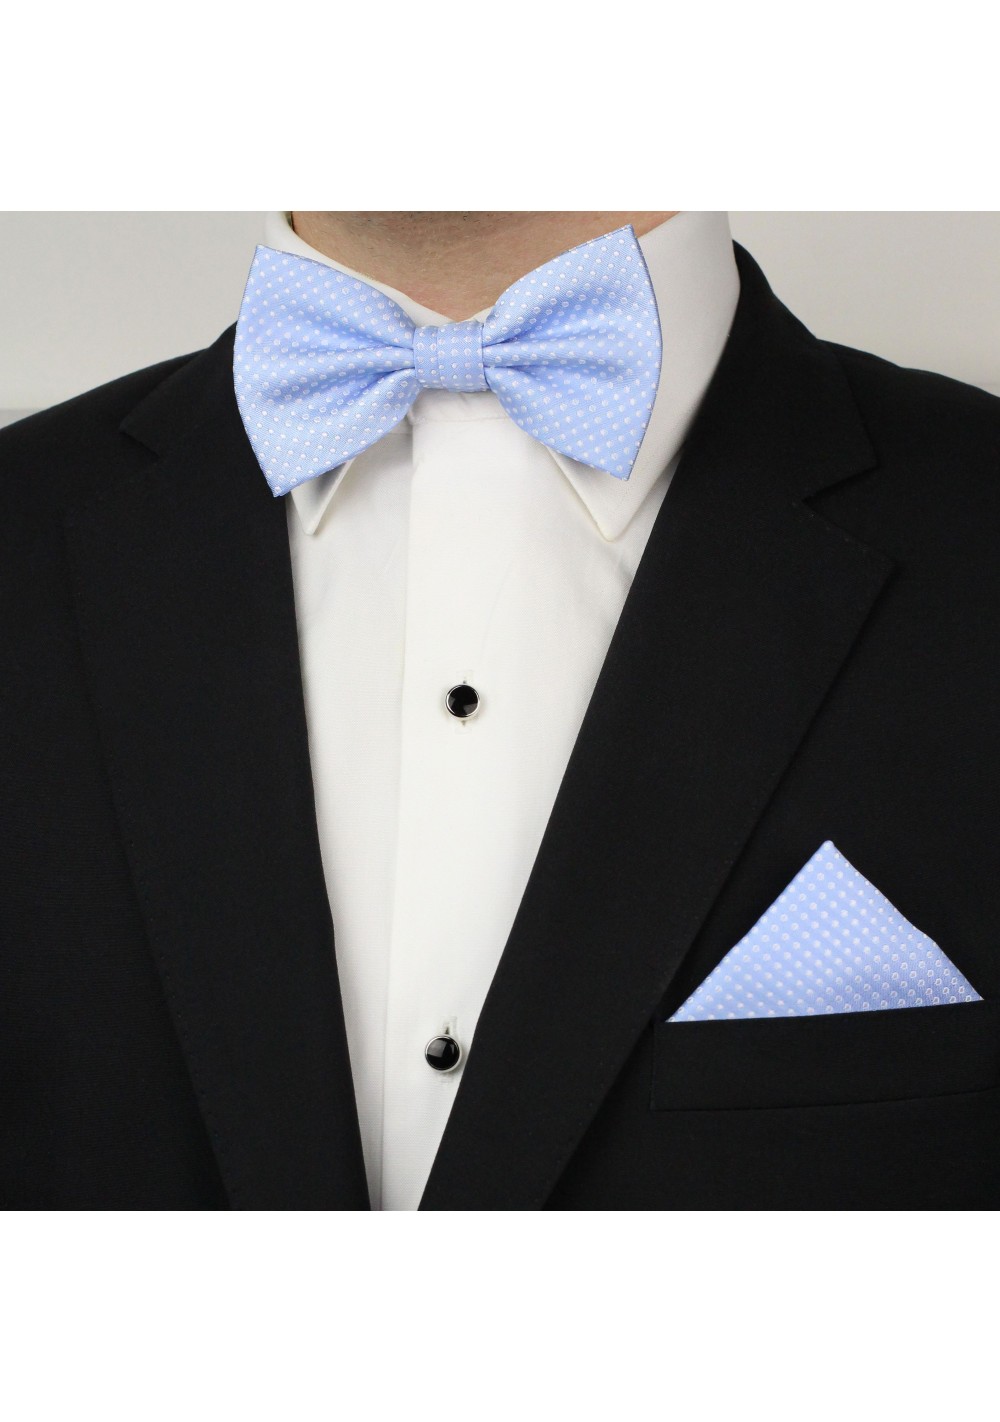 Bow Tie Set in Baby Blue | 2-piece Bow Tie and Pocket Square Set in ...